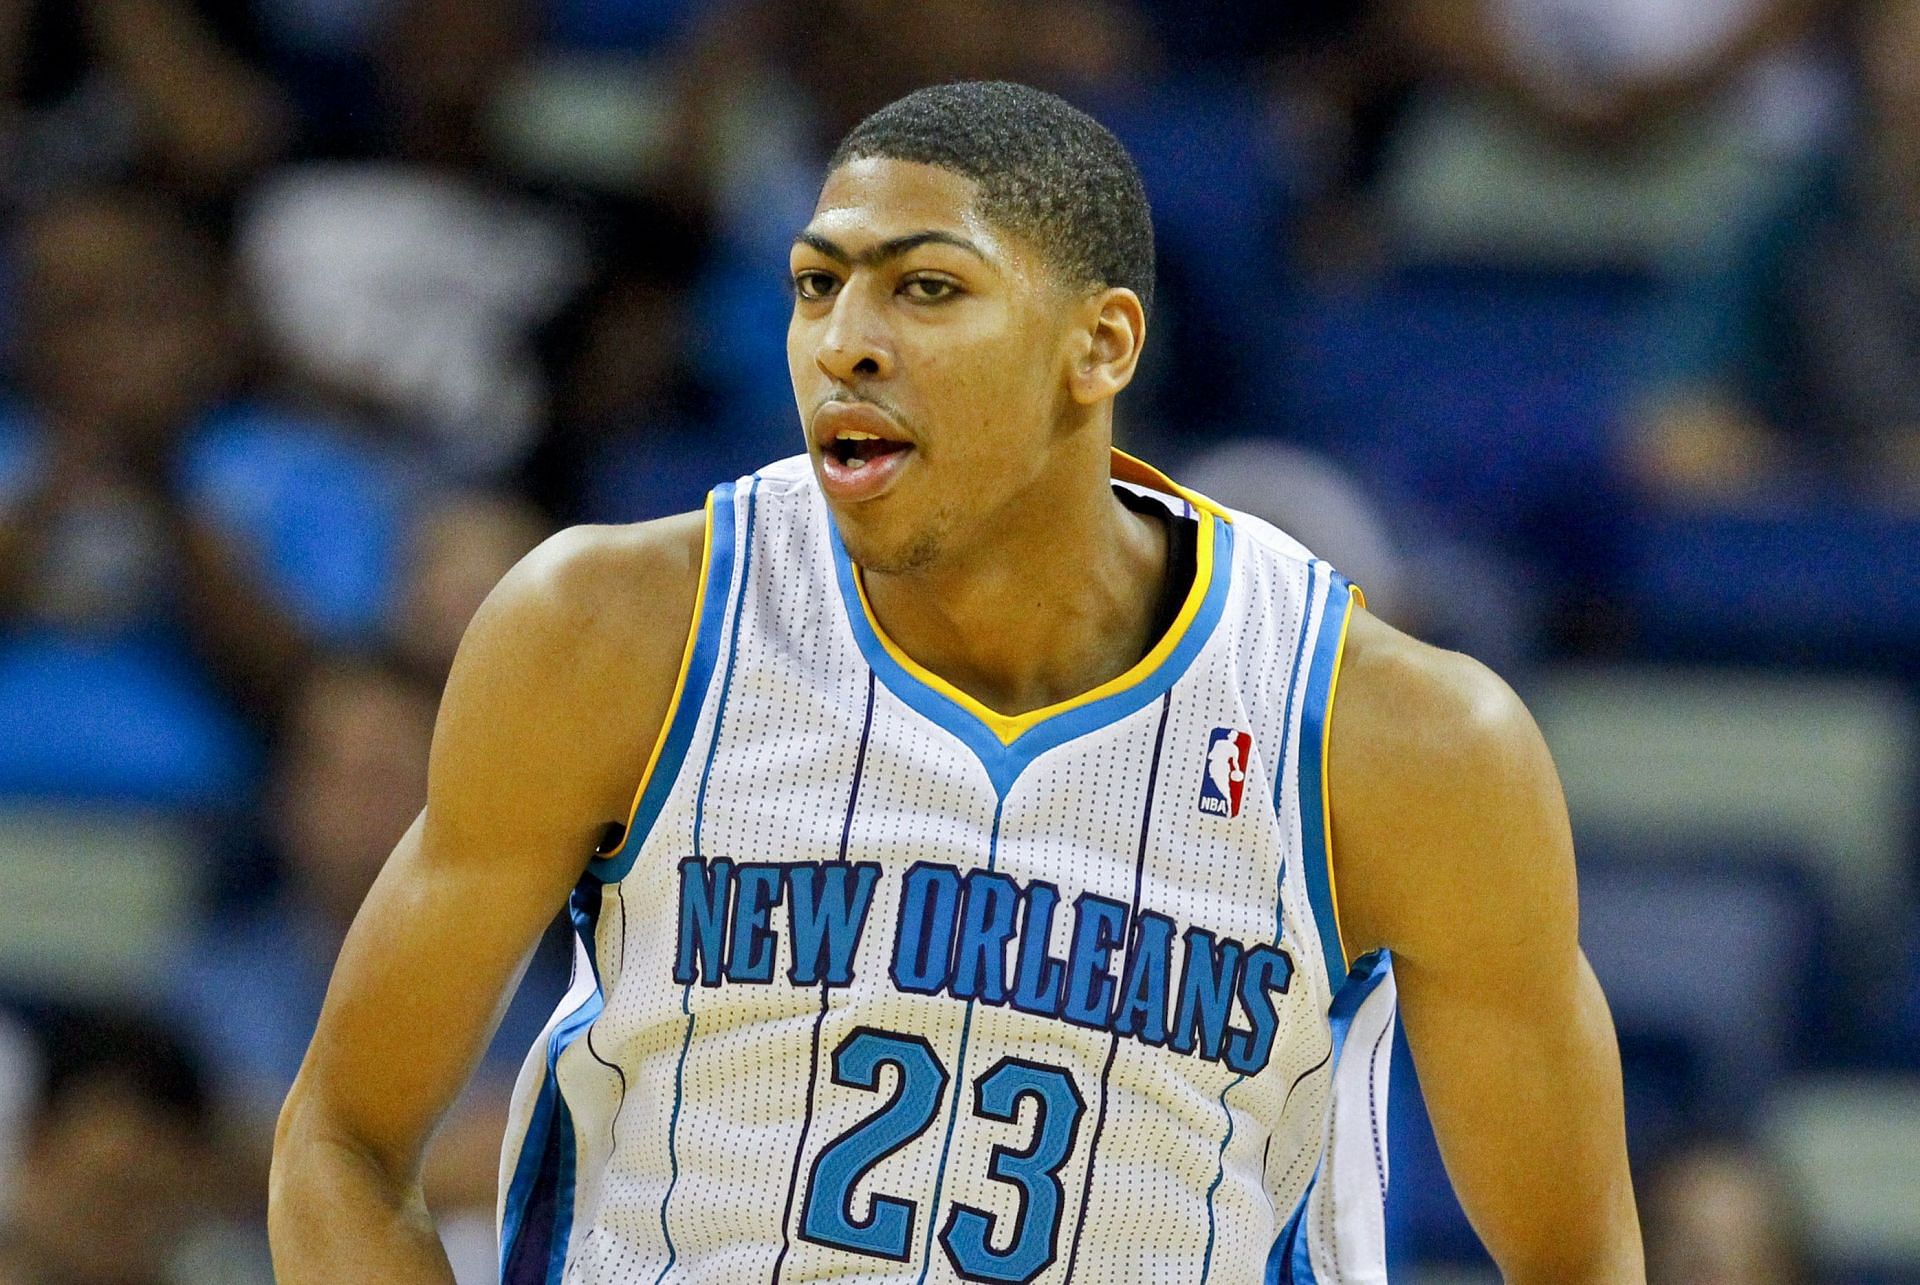 Anthony Davis went on to deal with a number of injuries during his rookie season in the NBA